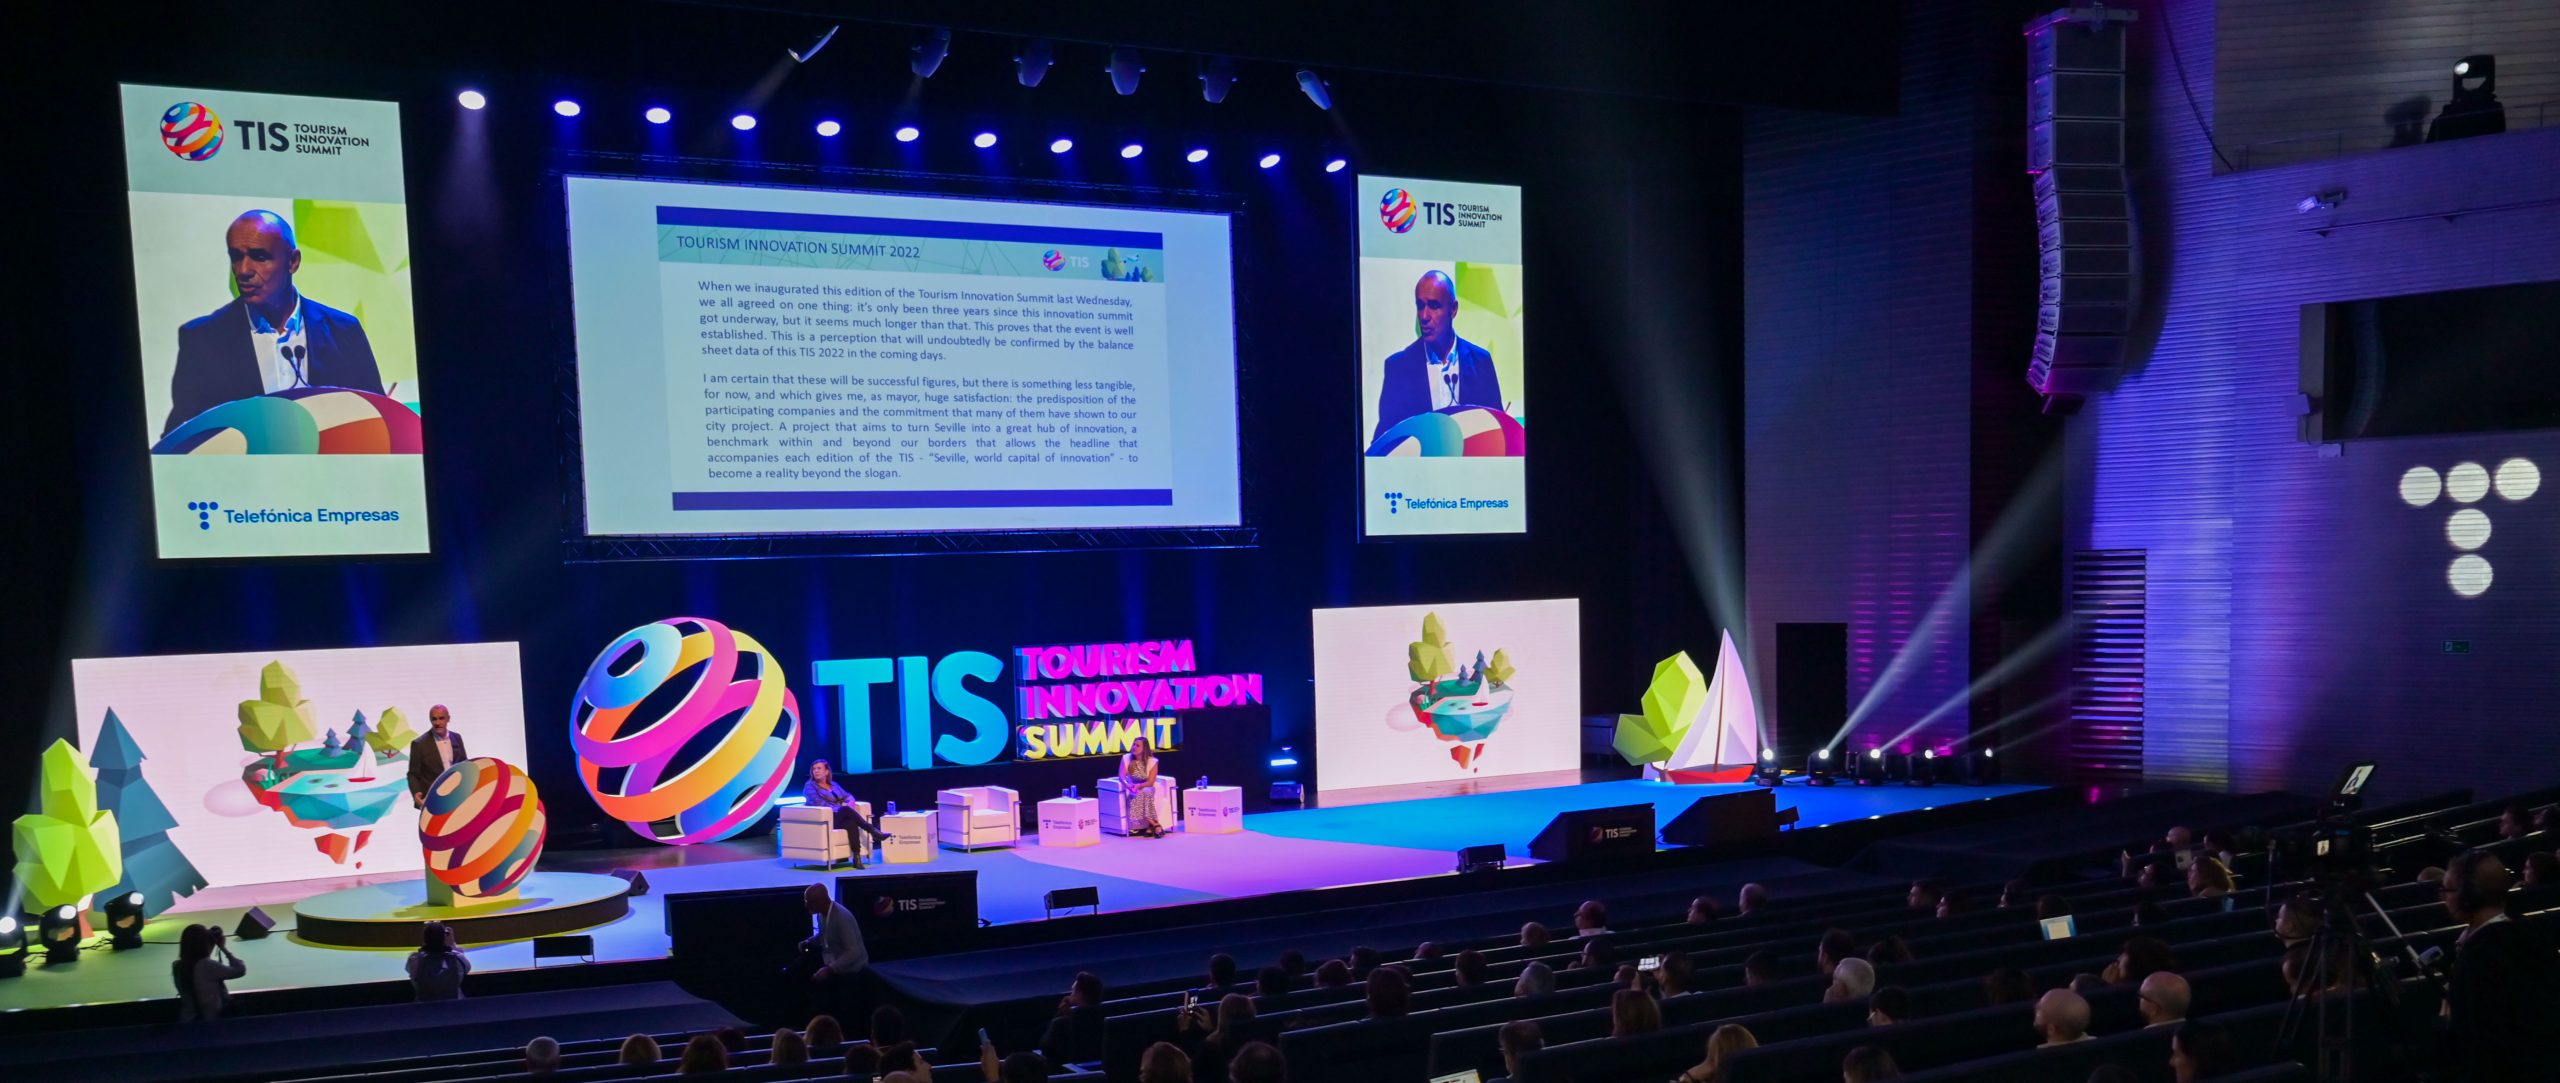 TIS2022 closes its third edition with 6,167 attendees and consolidates its position as a leading event in tourism innovation worldwide